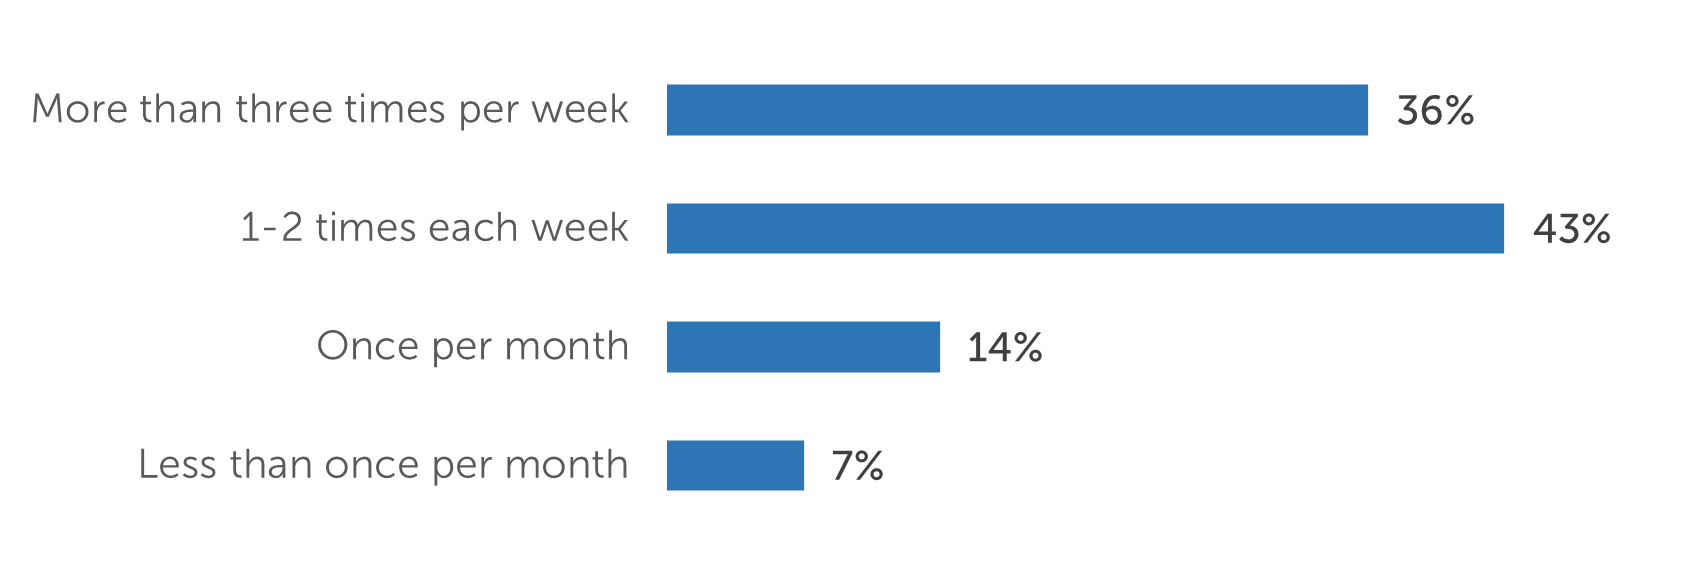 More than three times per week  87 (36%)  1-2 times each week  103 (43%)  Once per month   34 (14%)  Less than once per month  18 (7%) 